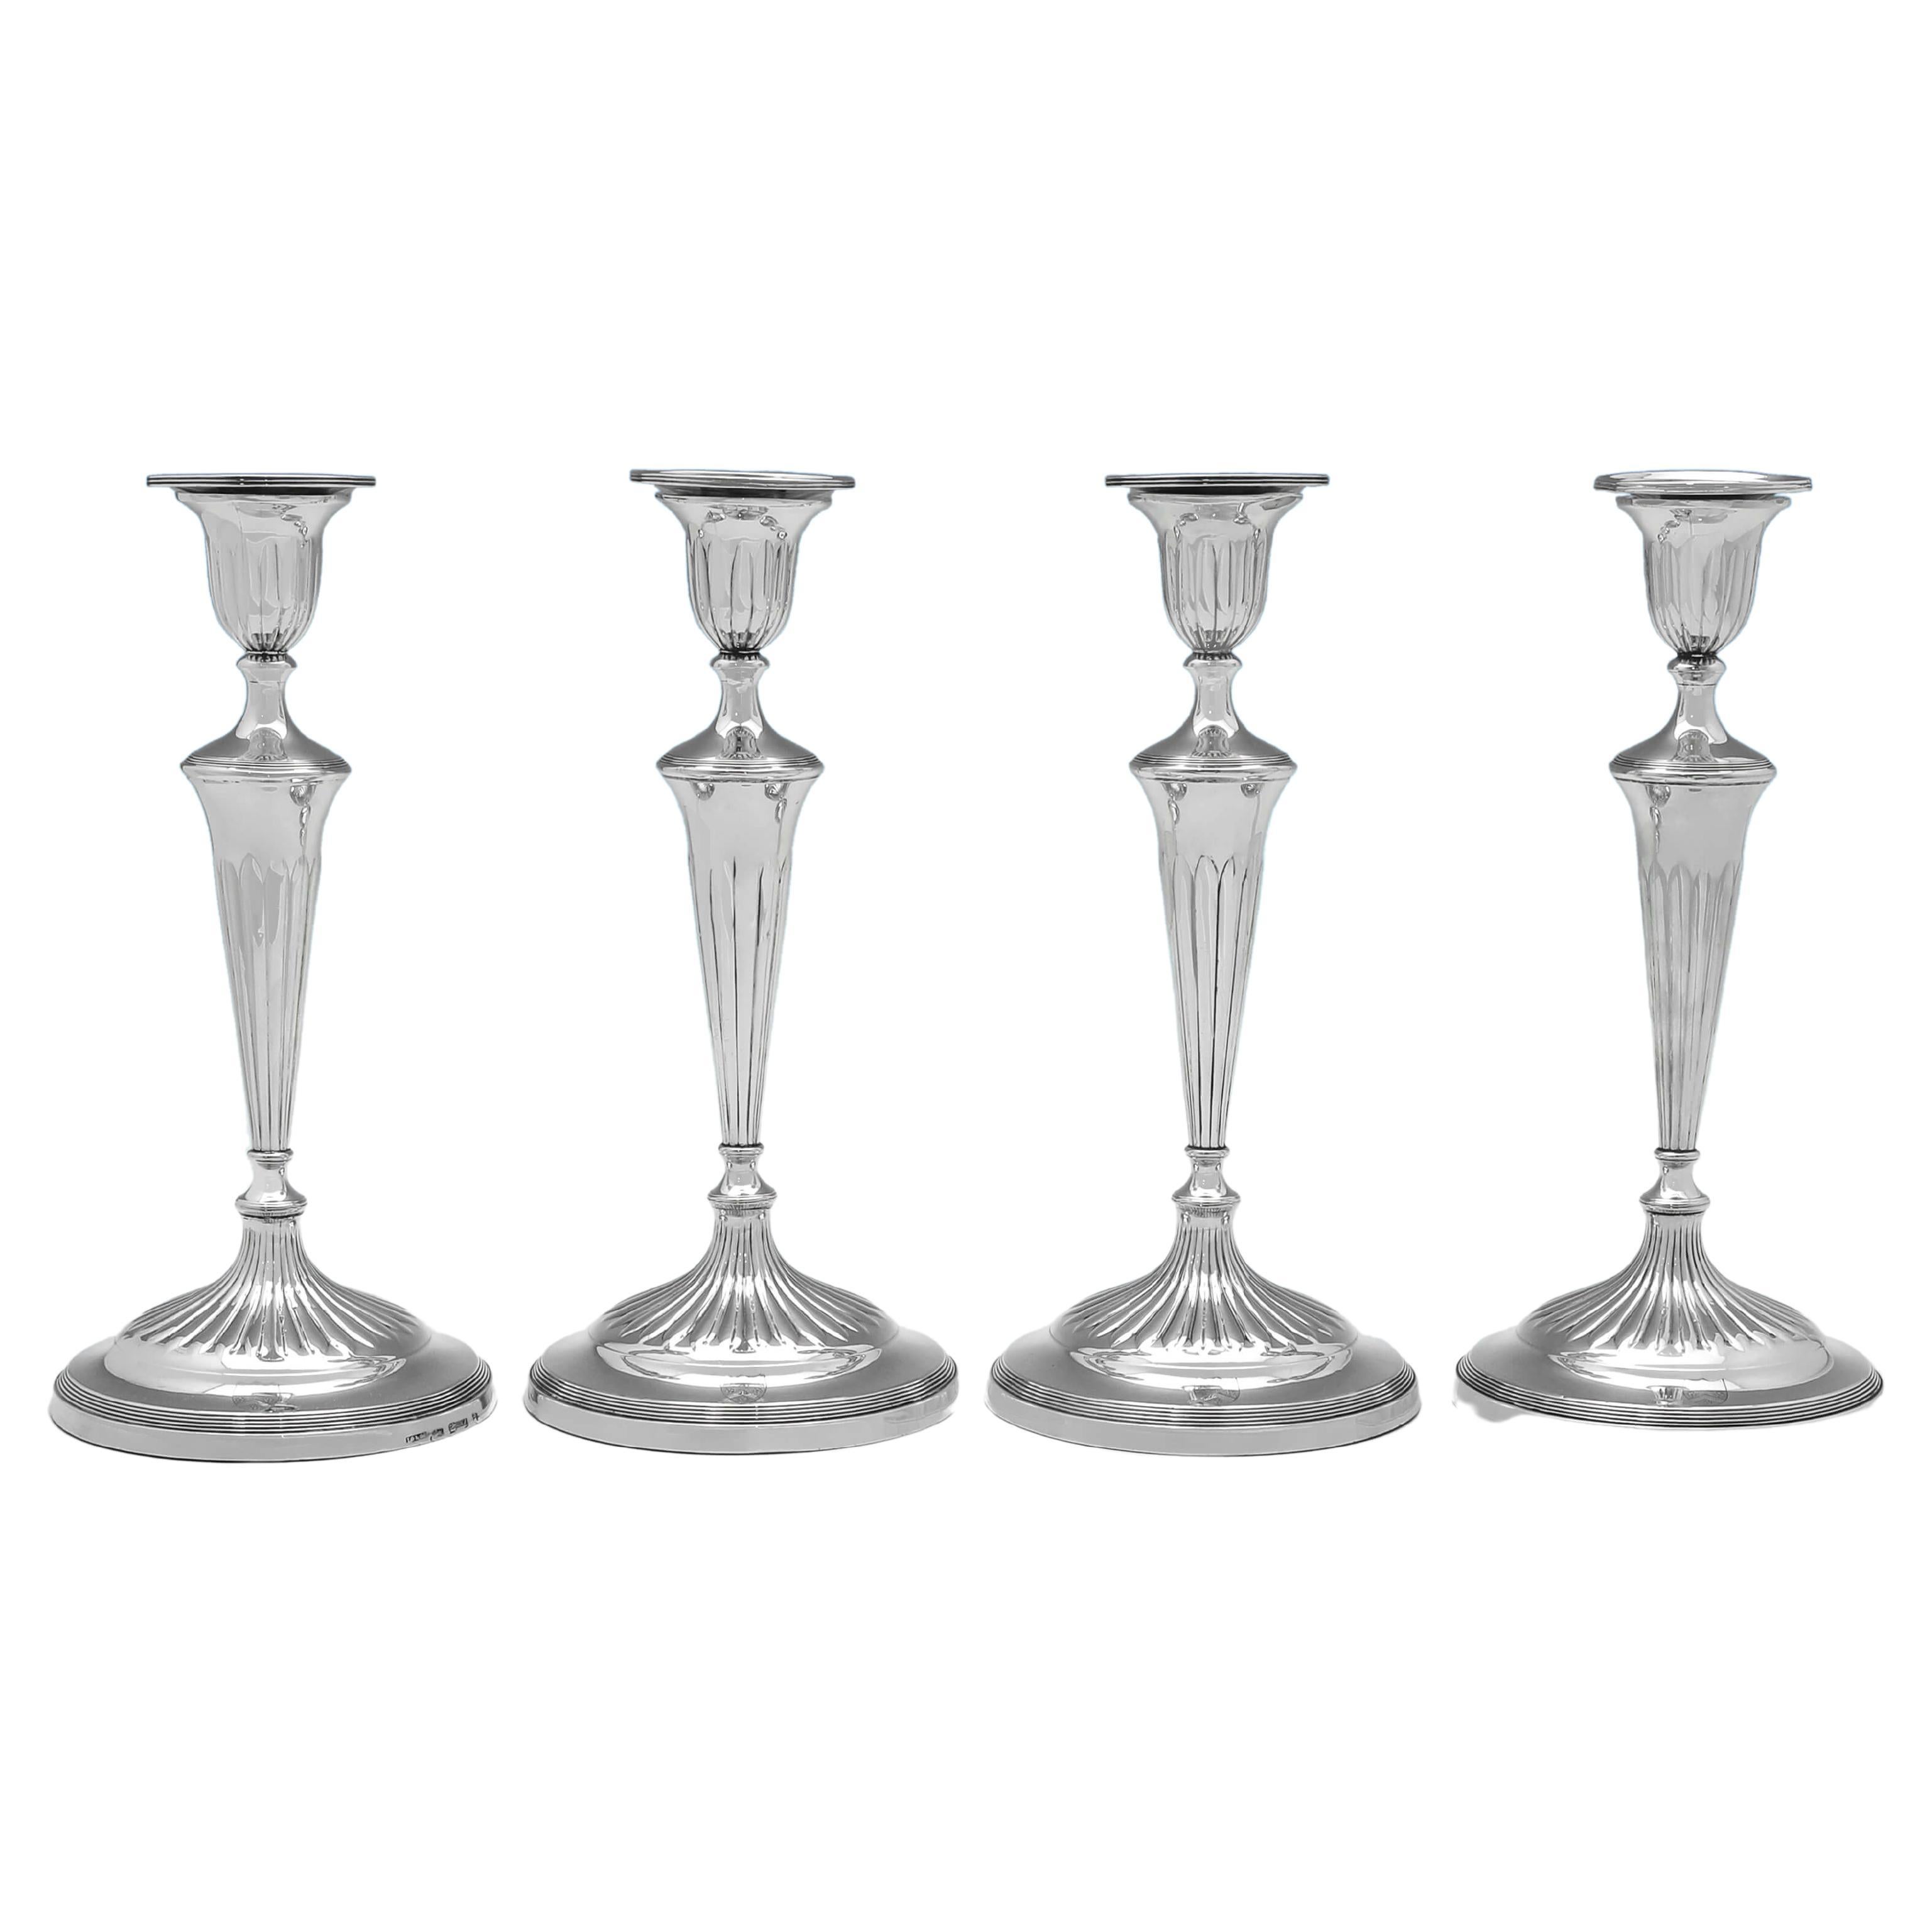 Neoclassical Set of 4 Antique Sterling Silver Candlesticks, Sheffield 1796